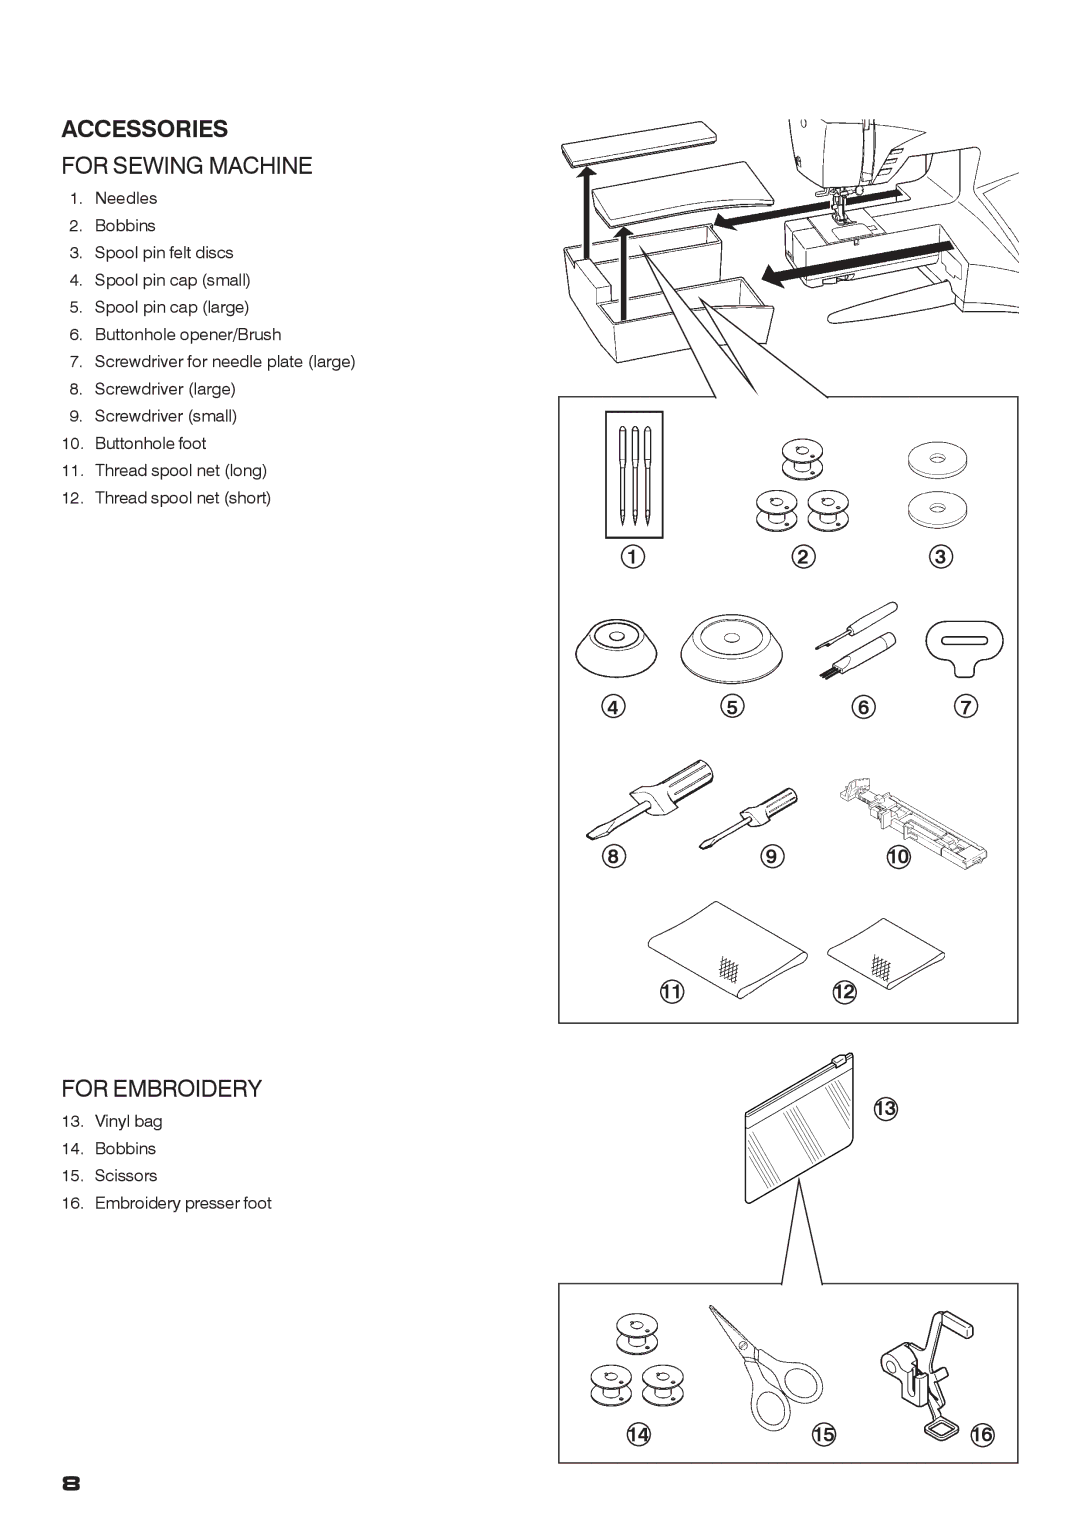 Singer CE-200 instruction manual Accessories, For Sewing Machine, For Embroidery 